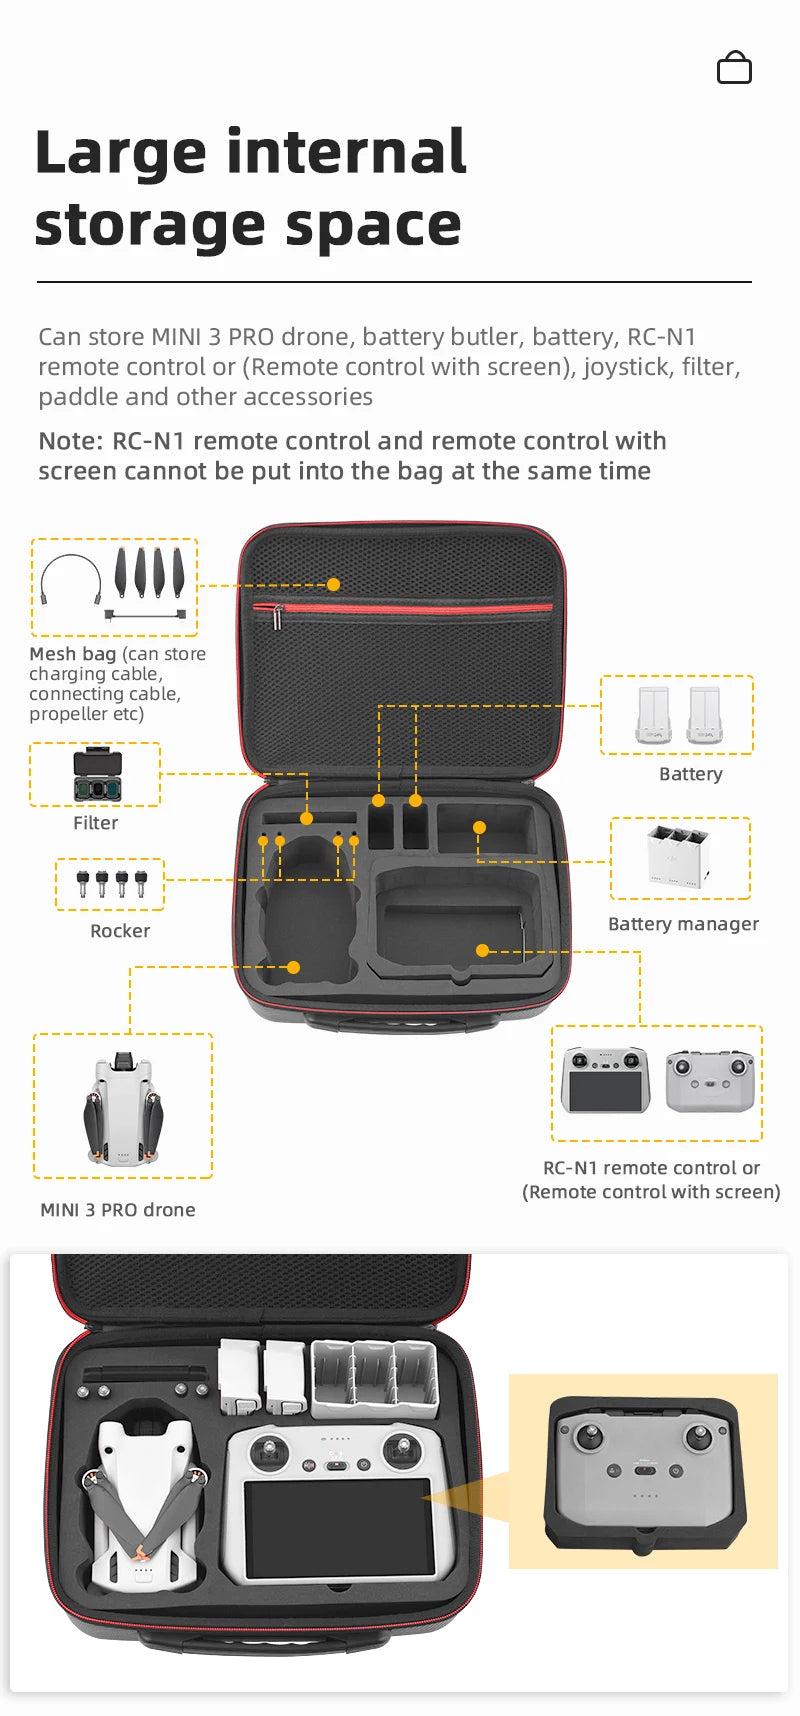 Storage Case Portable Suitcase For DJI Mini 3 Pro, large internal storage space Can store MINI 3 PRO drone, battery butler, battery, RC